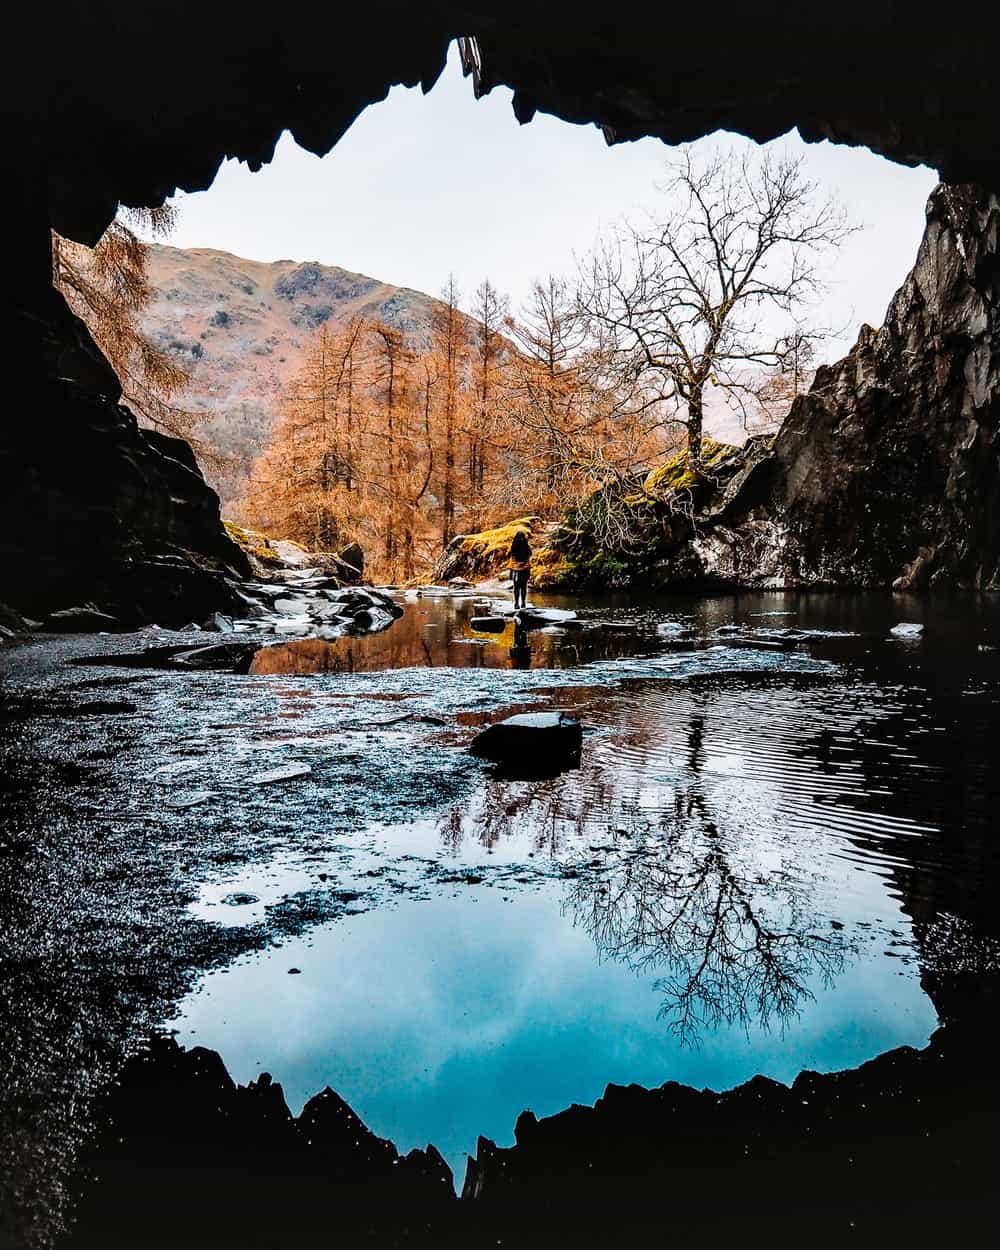 Rydal Cave is FREE entry!